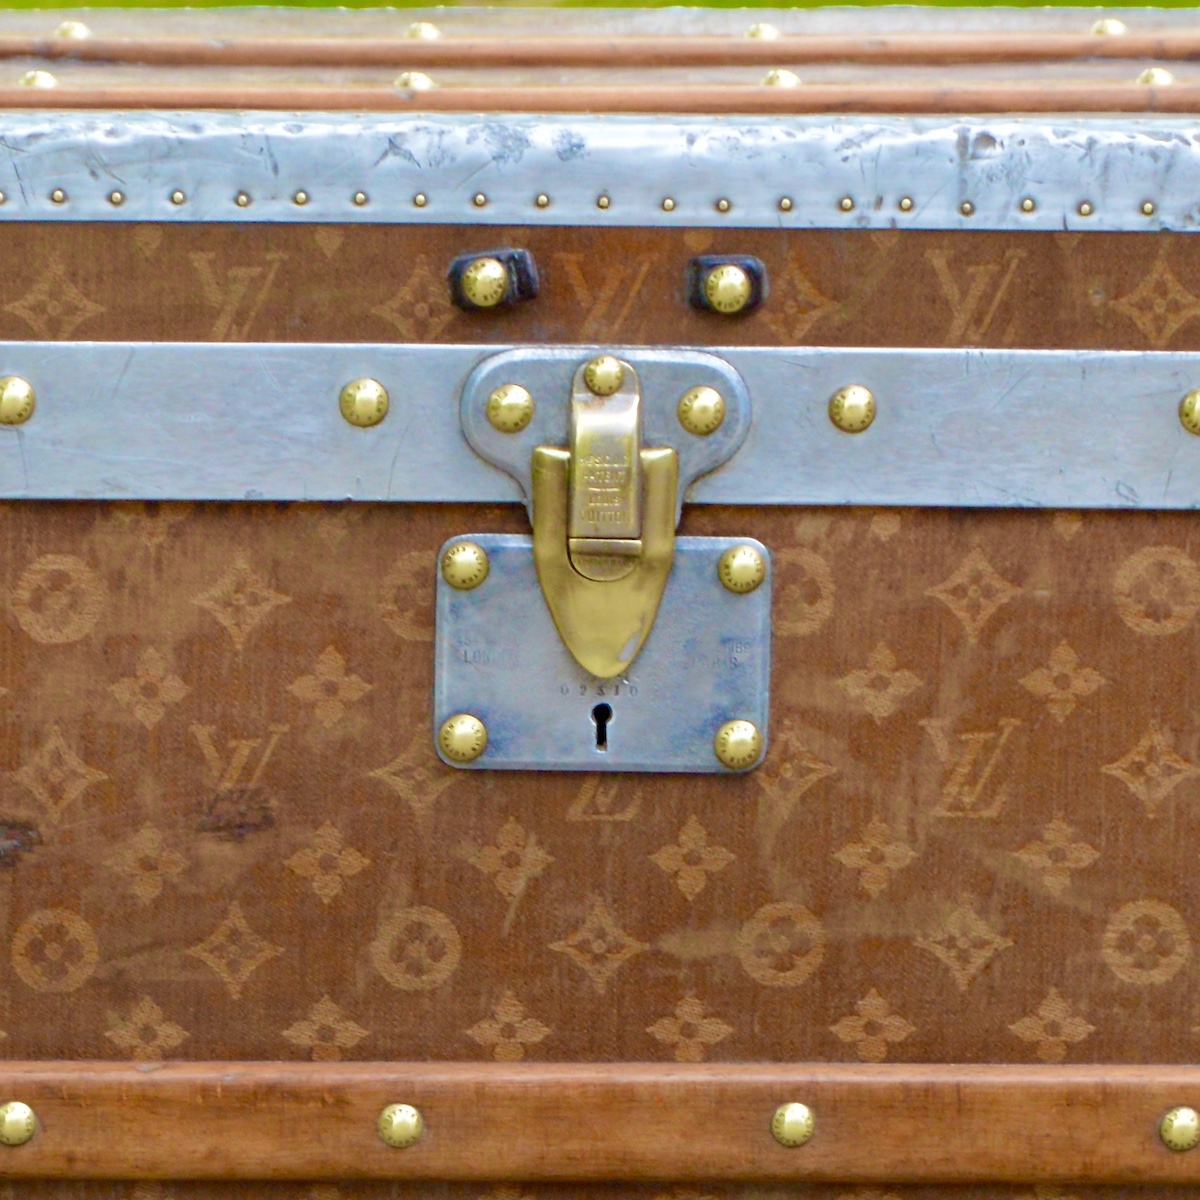 Louis Vuitton trunk the different locks - Baggage Collection